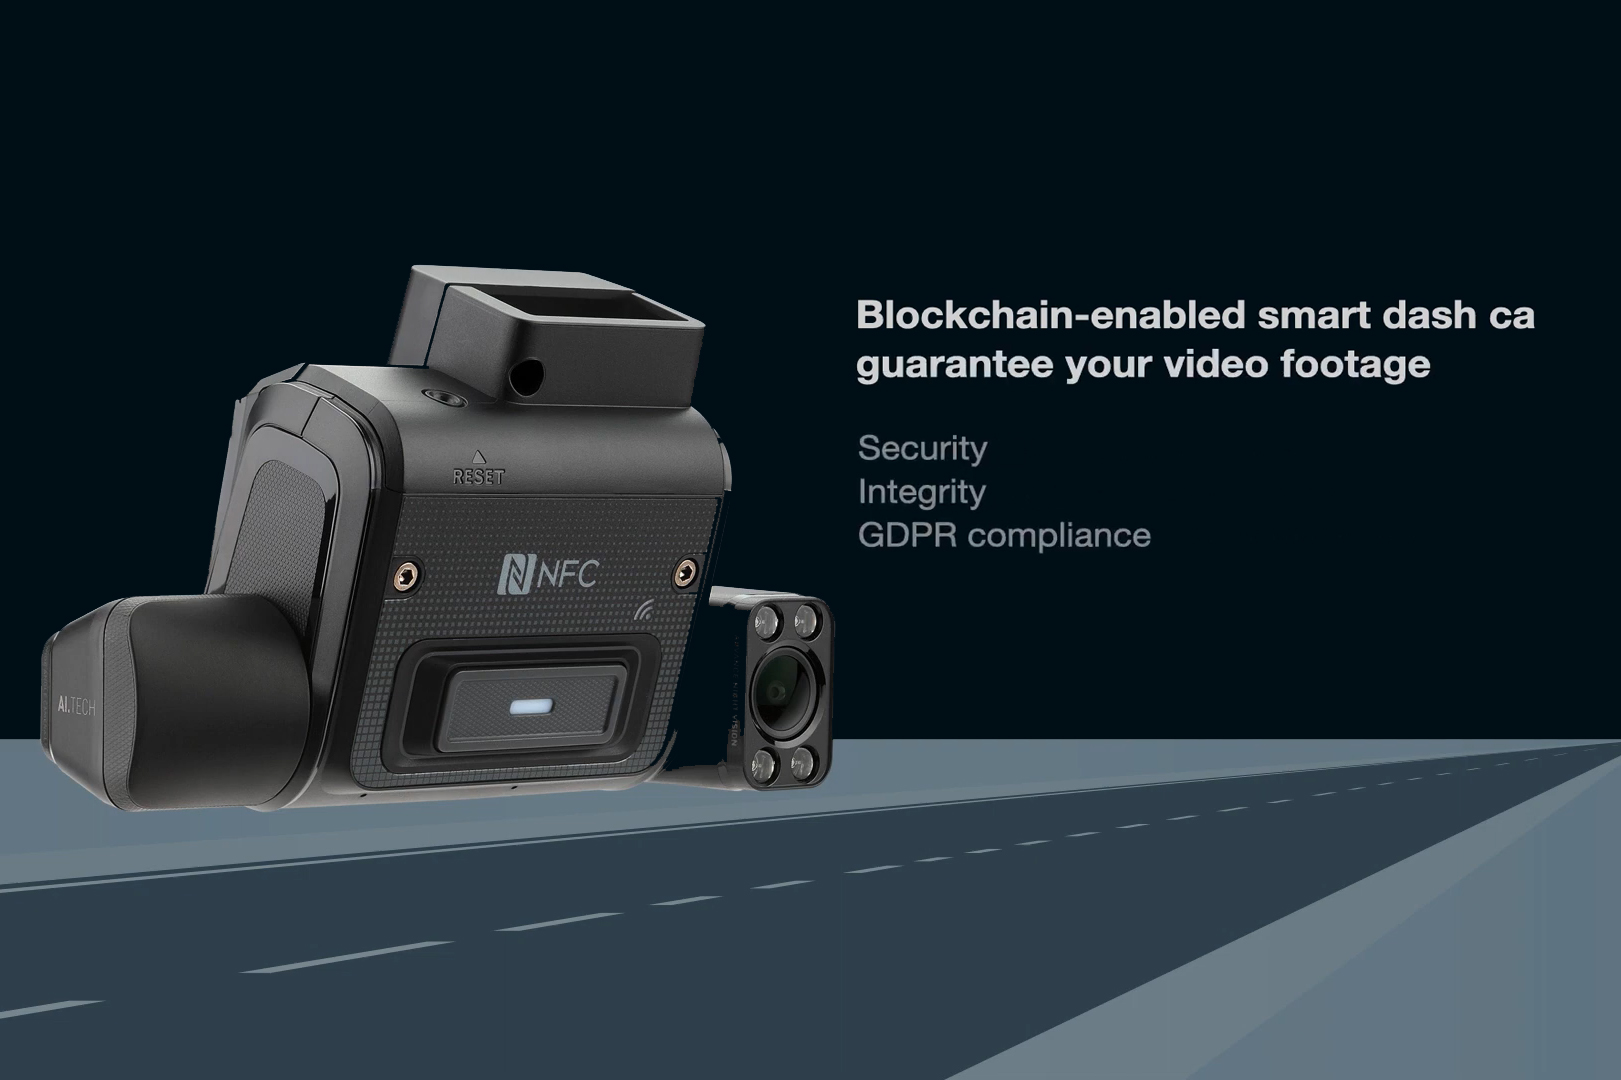 Strategic Partner MiTAC Launches the World's First Blockchain-enabled Vehicle Dash Camera